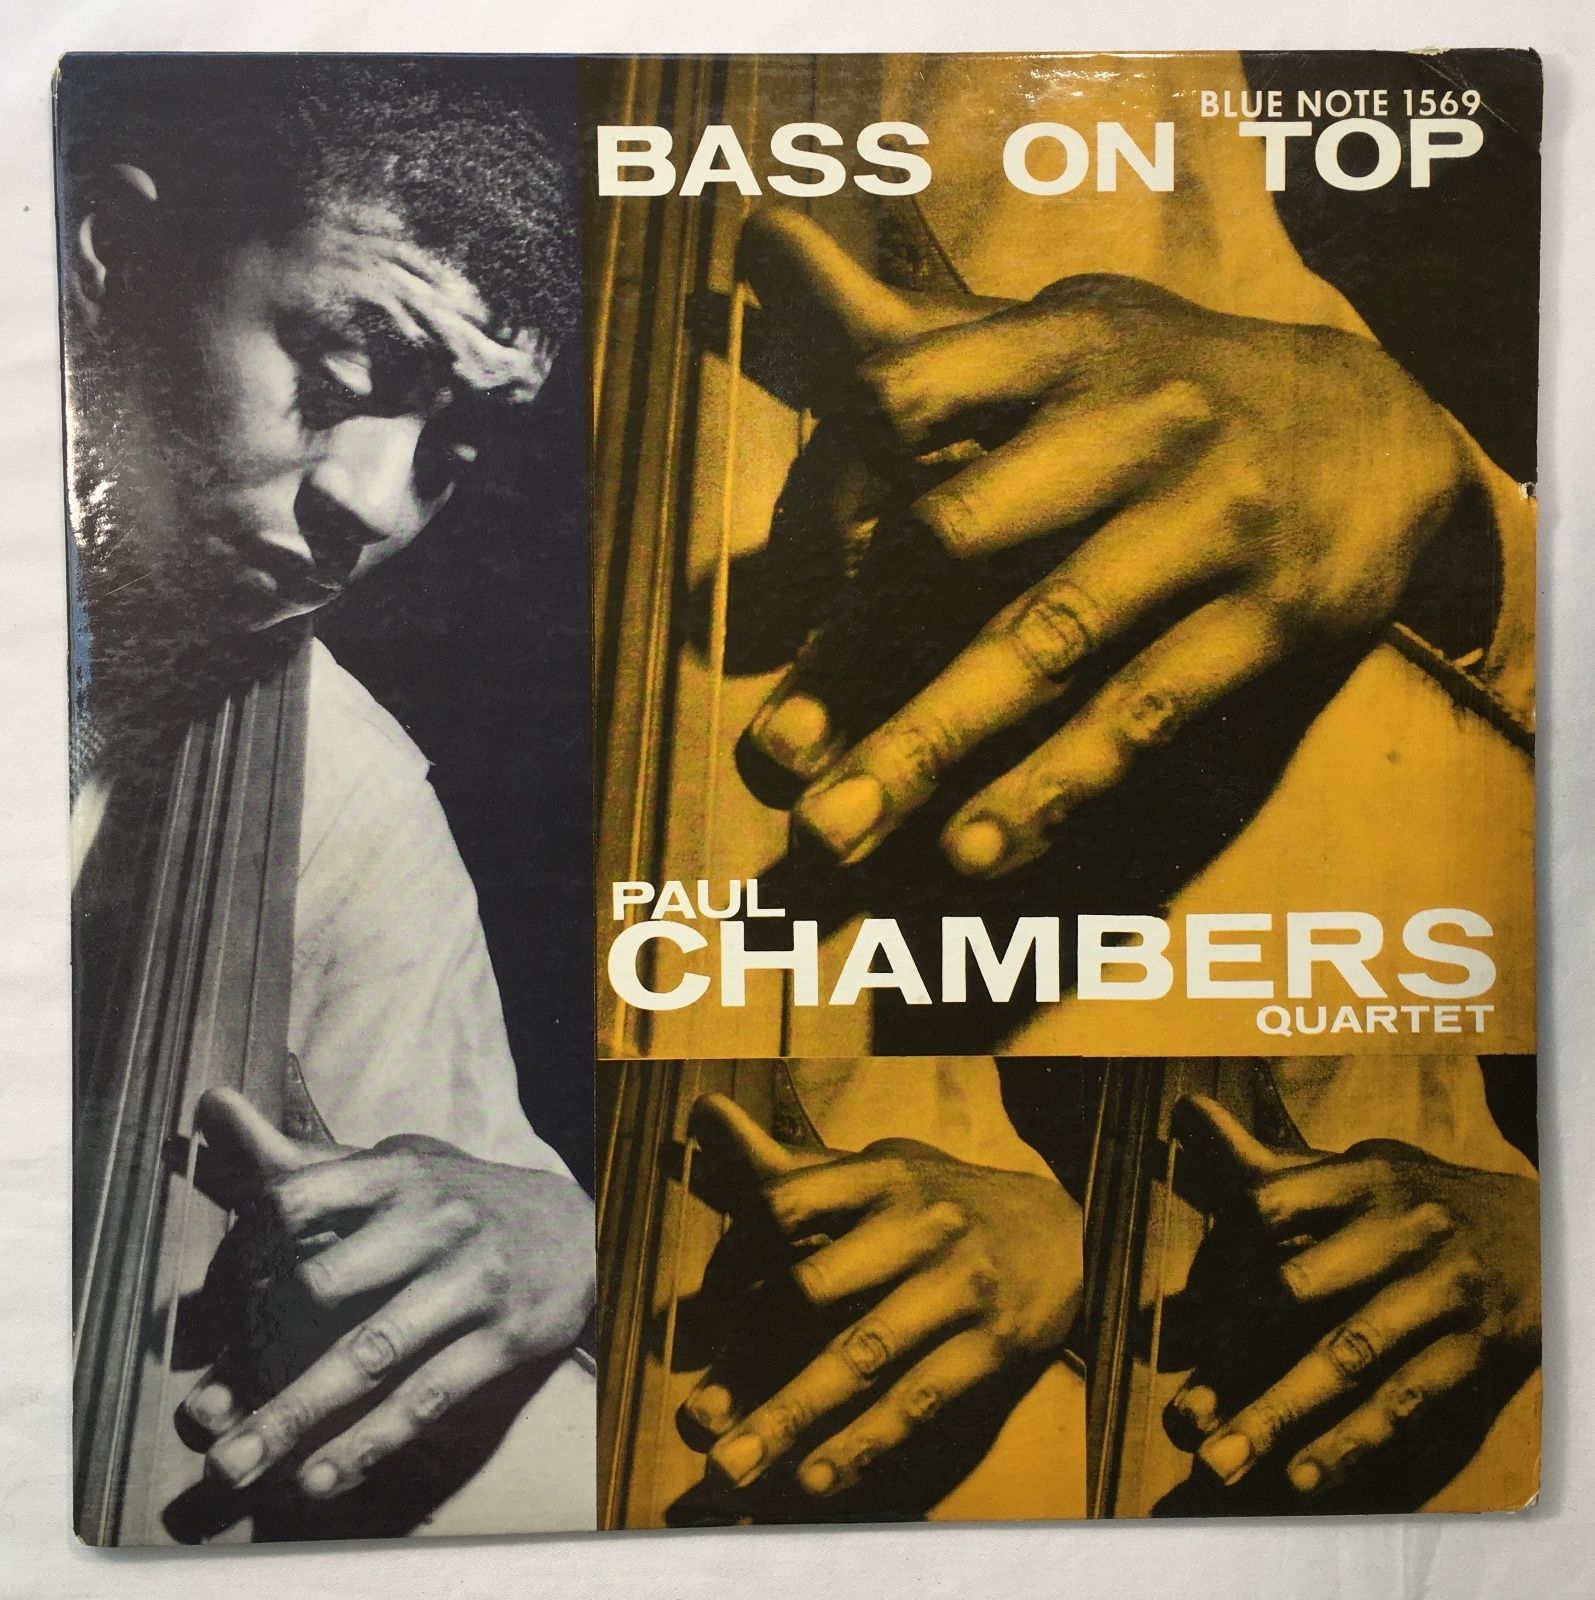 PAUL CHAMBERS BASS ON TOP BLUE NOTE 1569 47W63 DG ear RVG NoR 1st ED M-